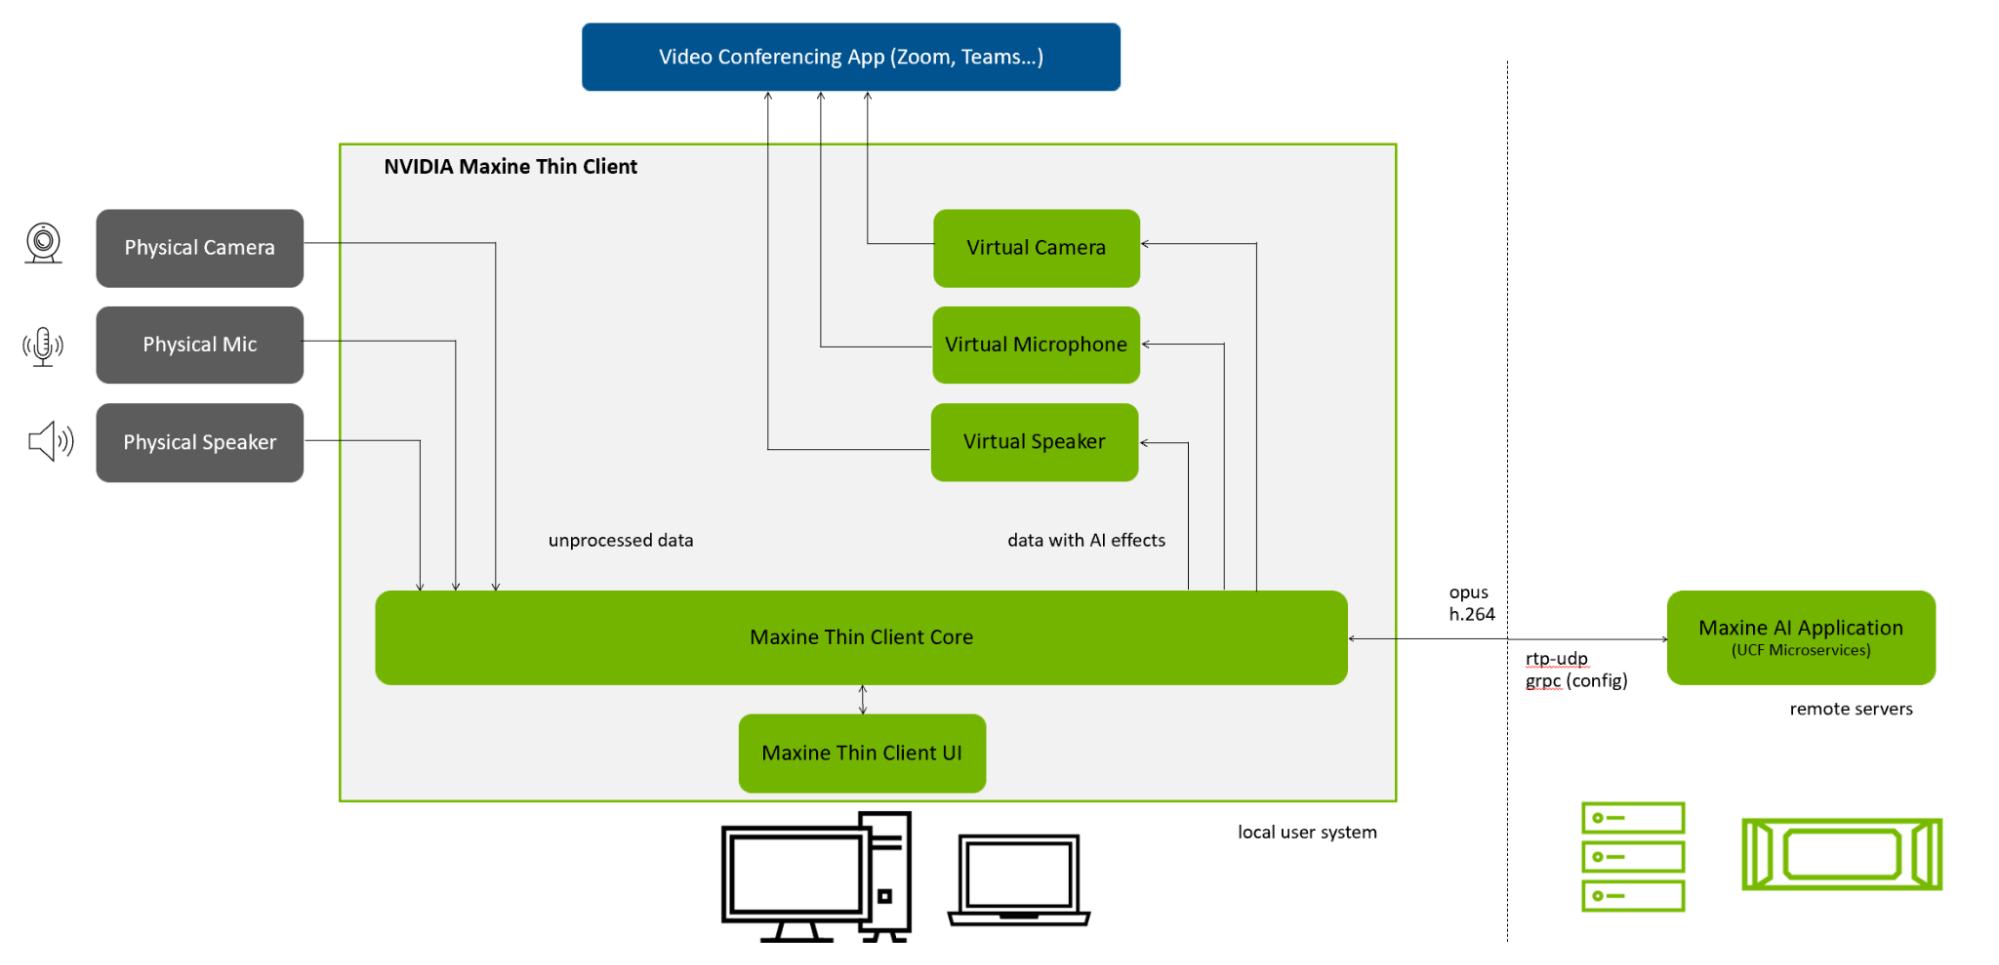 Diagram showing NVIDIA Maxine Thin Client process.
